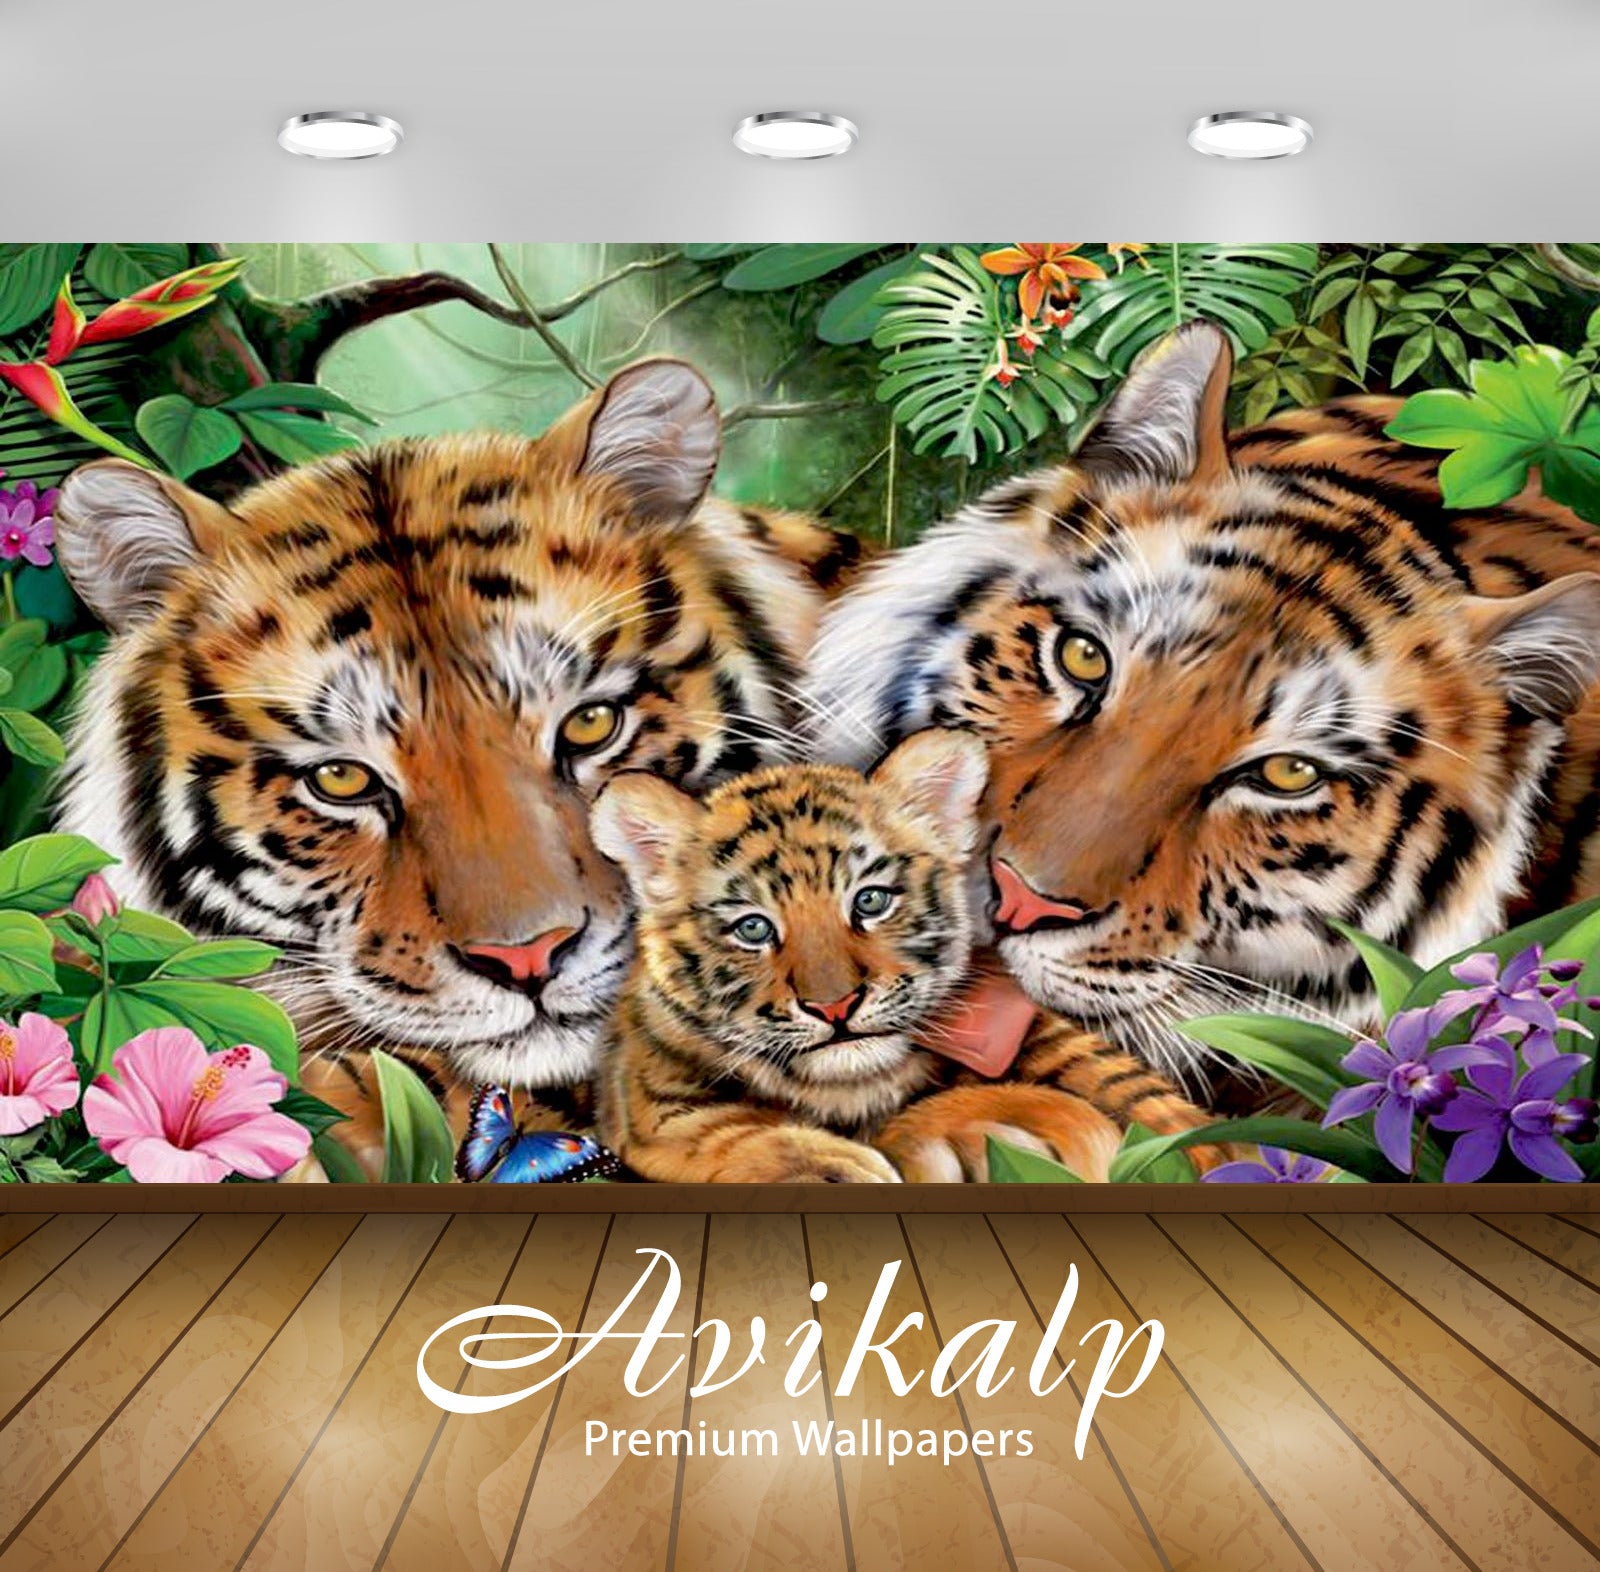 Avikalp Exclusive Awi2160 Tiger Love Tiger Jigsaw  Full HD Wallpapers for Living room, Hall, Kids Ro